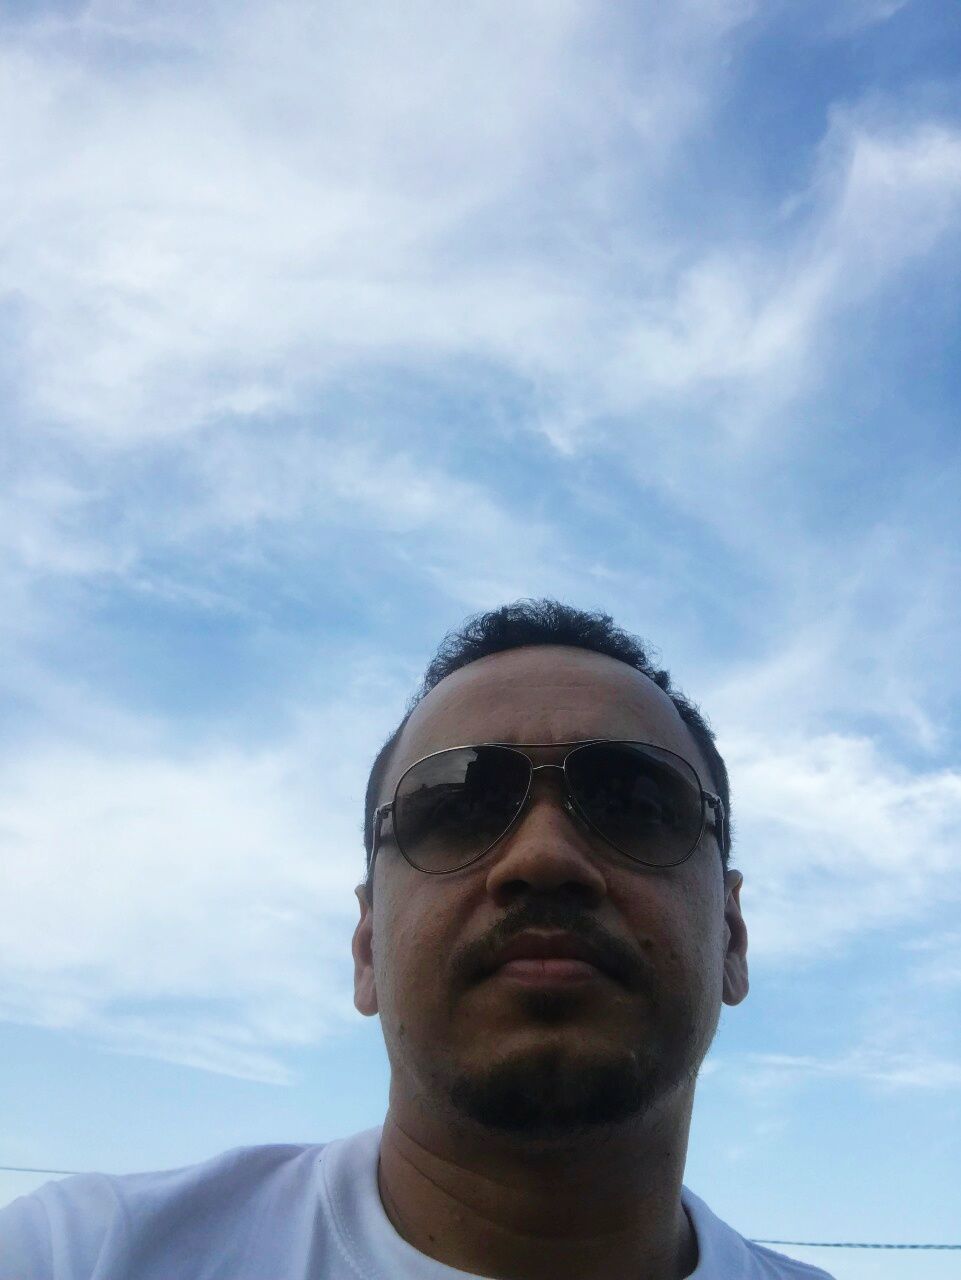 sky, portrait, one person, headshot, cloud - sky, front view, men, sunglasses, glasses, males, low angle view, mid adult men, day, lifestyles, leisure activity, nature, real people, mid adult, mature men, fashion, outdoors, human face